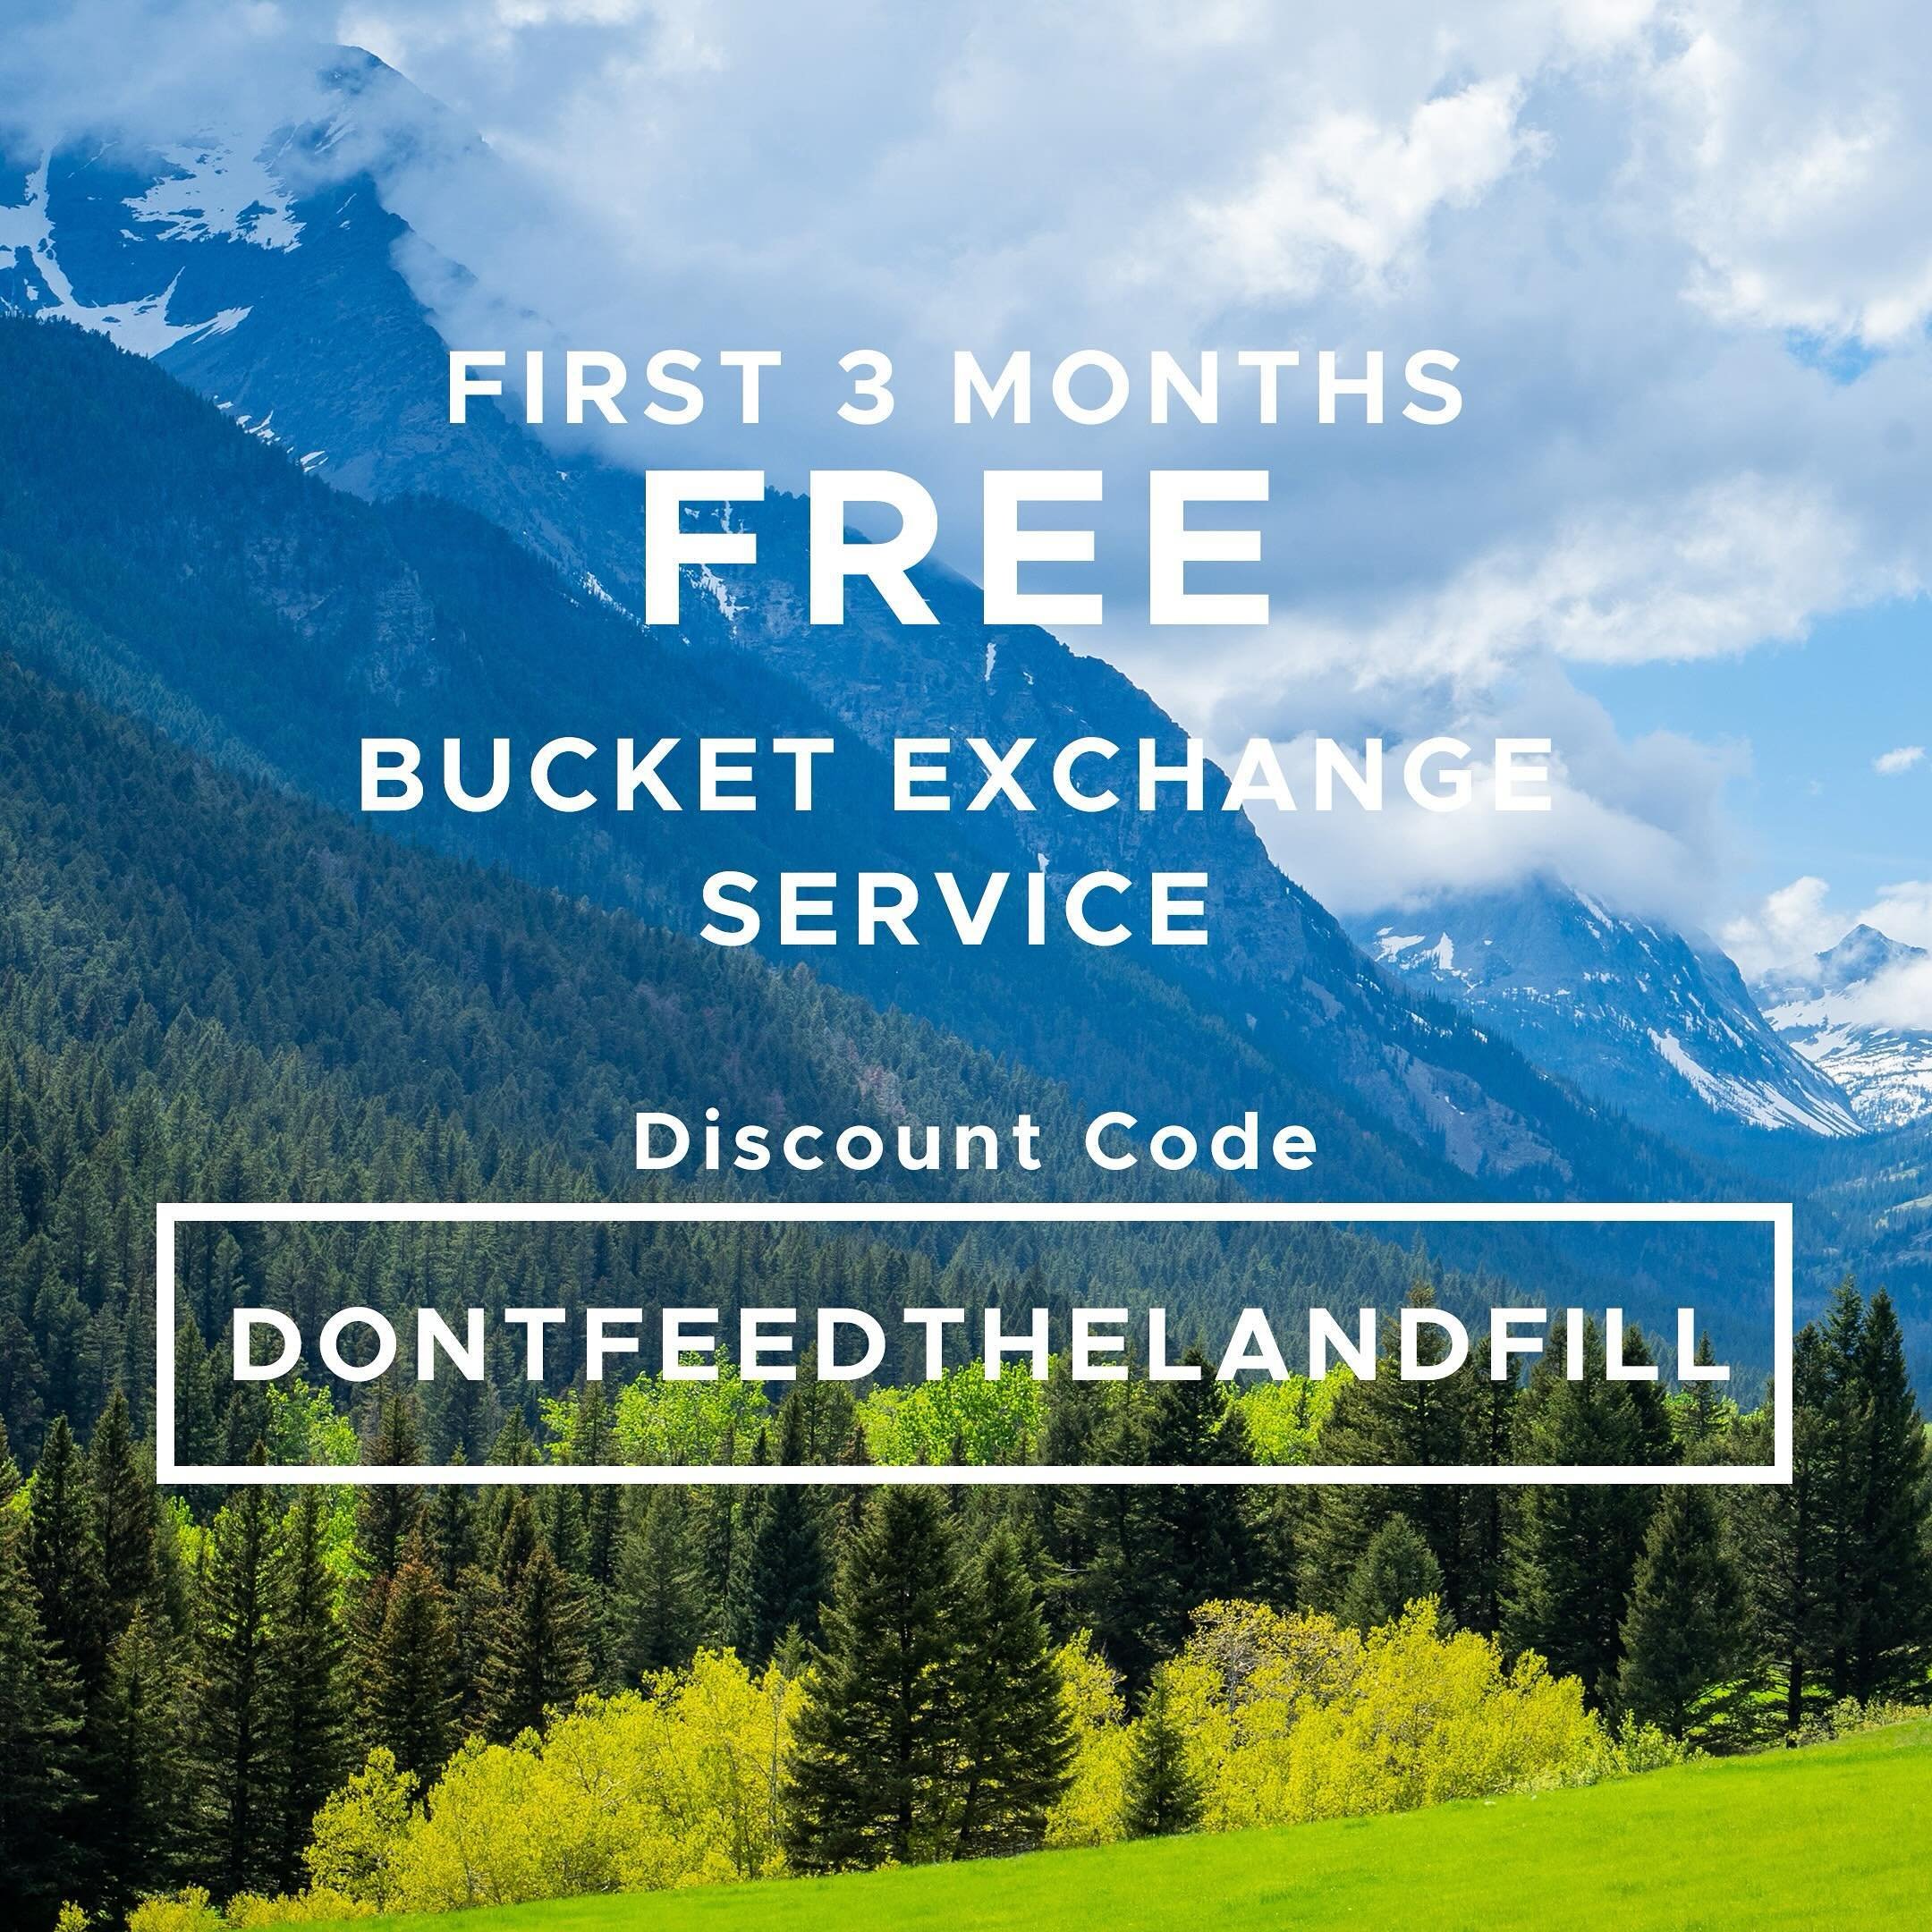 Happy Earth Day! Today is the last day to get your first three months free when you sign up for our bucket exchange service! Use discount code DONTFEEDTHELANDFILL and help preserve our planet we call home 🌎 Go to our bio, click Helpful Links, then S